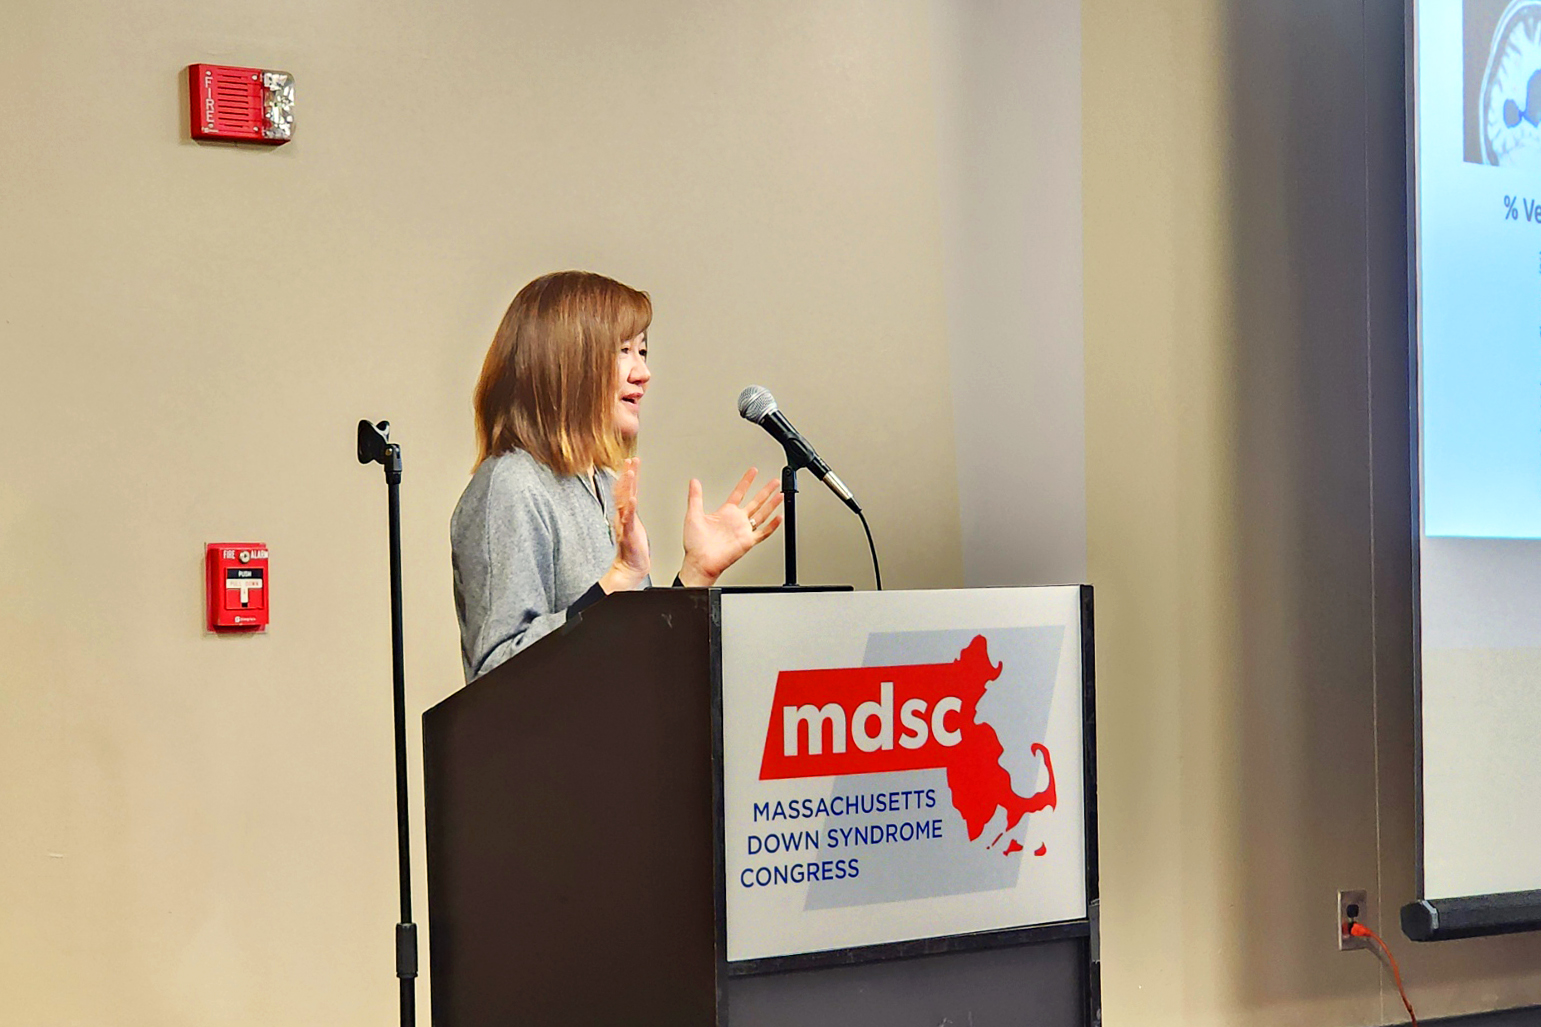 Li-Huei Tsai smiles and gestures from behind a podium that displays the Massachusetts Down Syndrome Congress logo